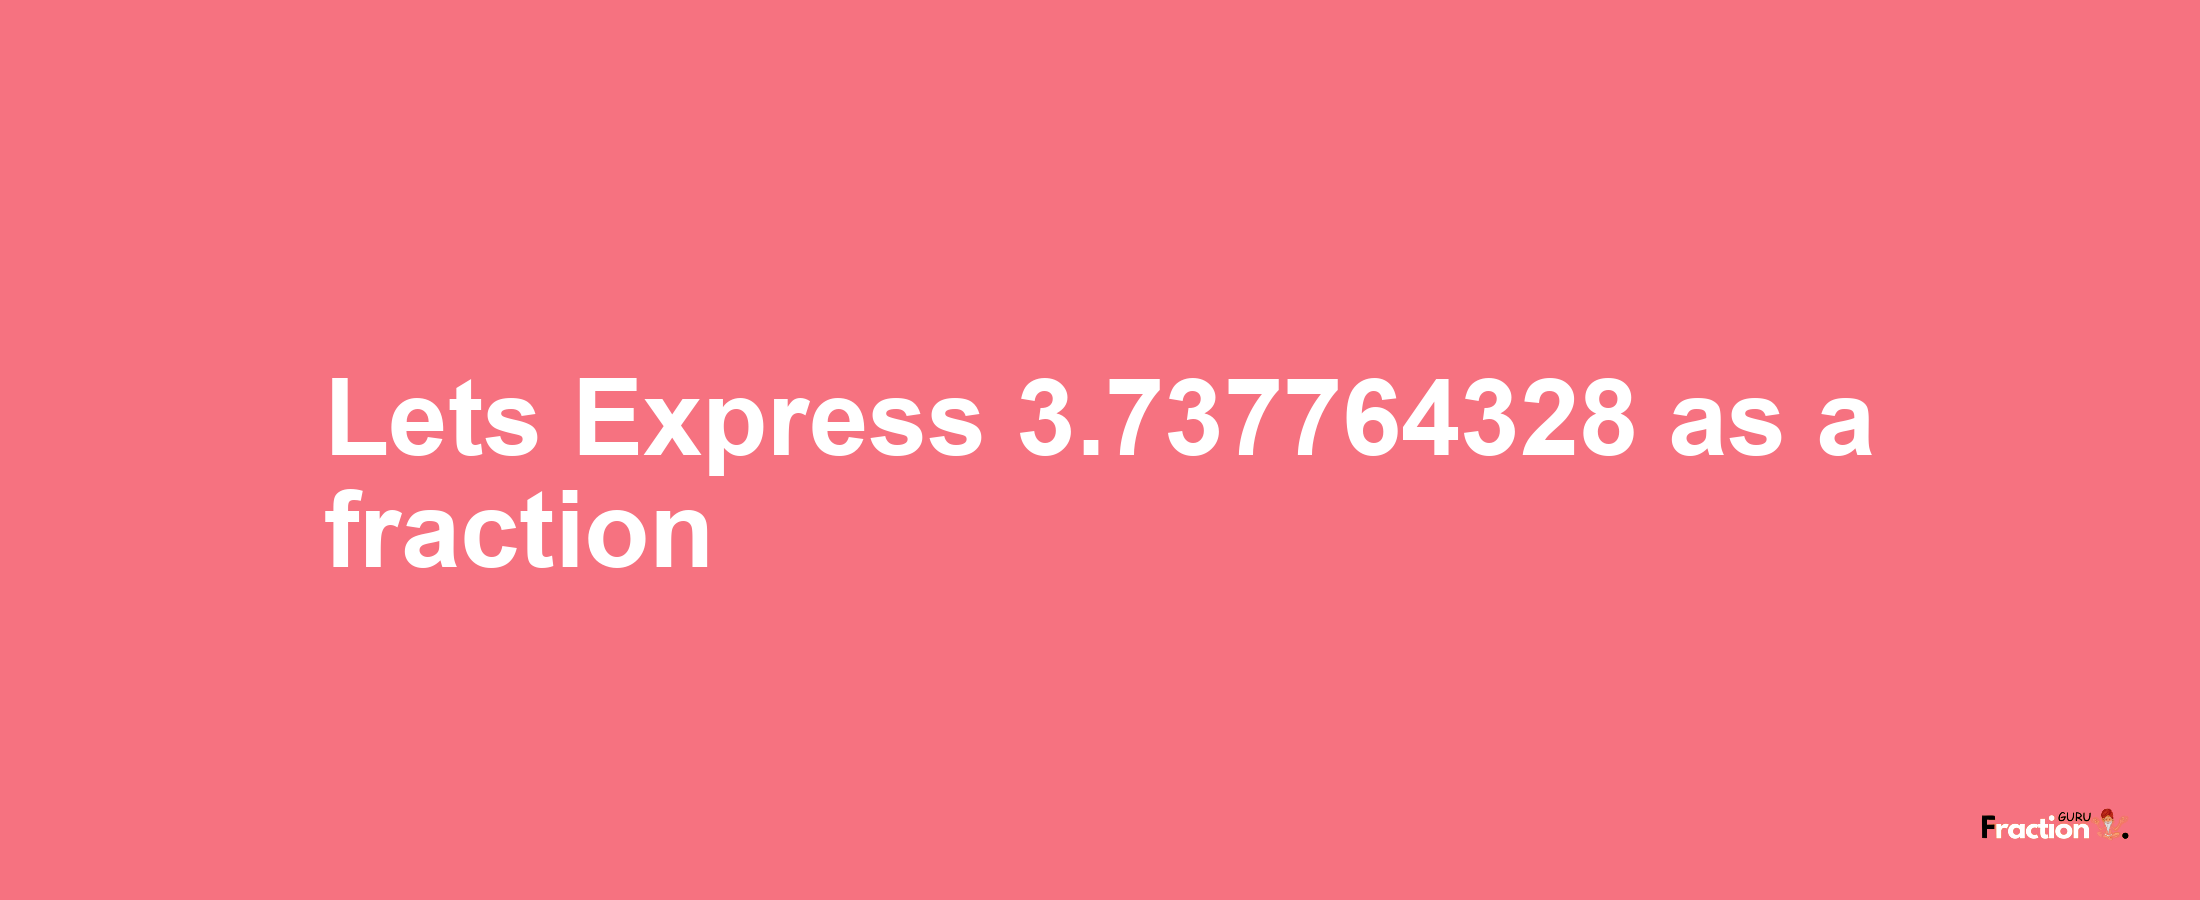 Lets Express 3.737764328 as afraction